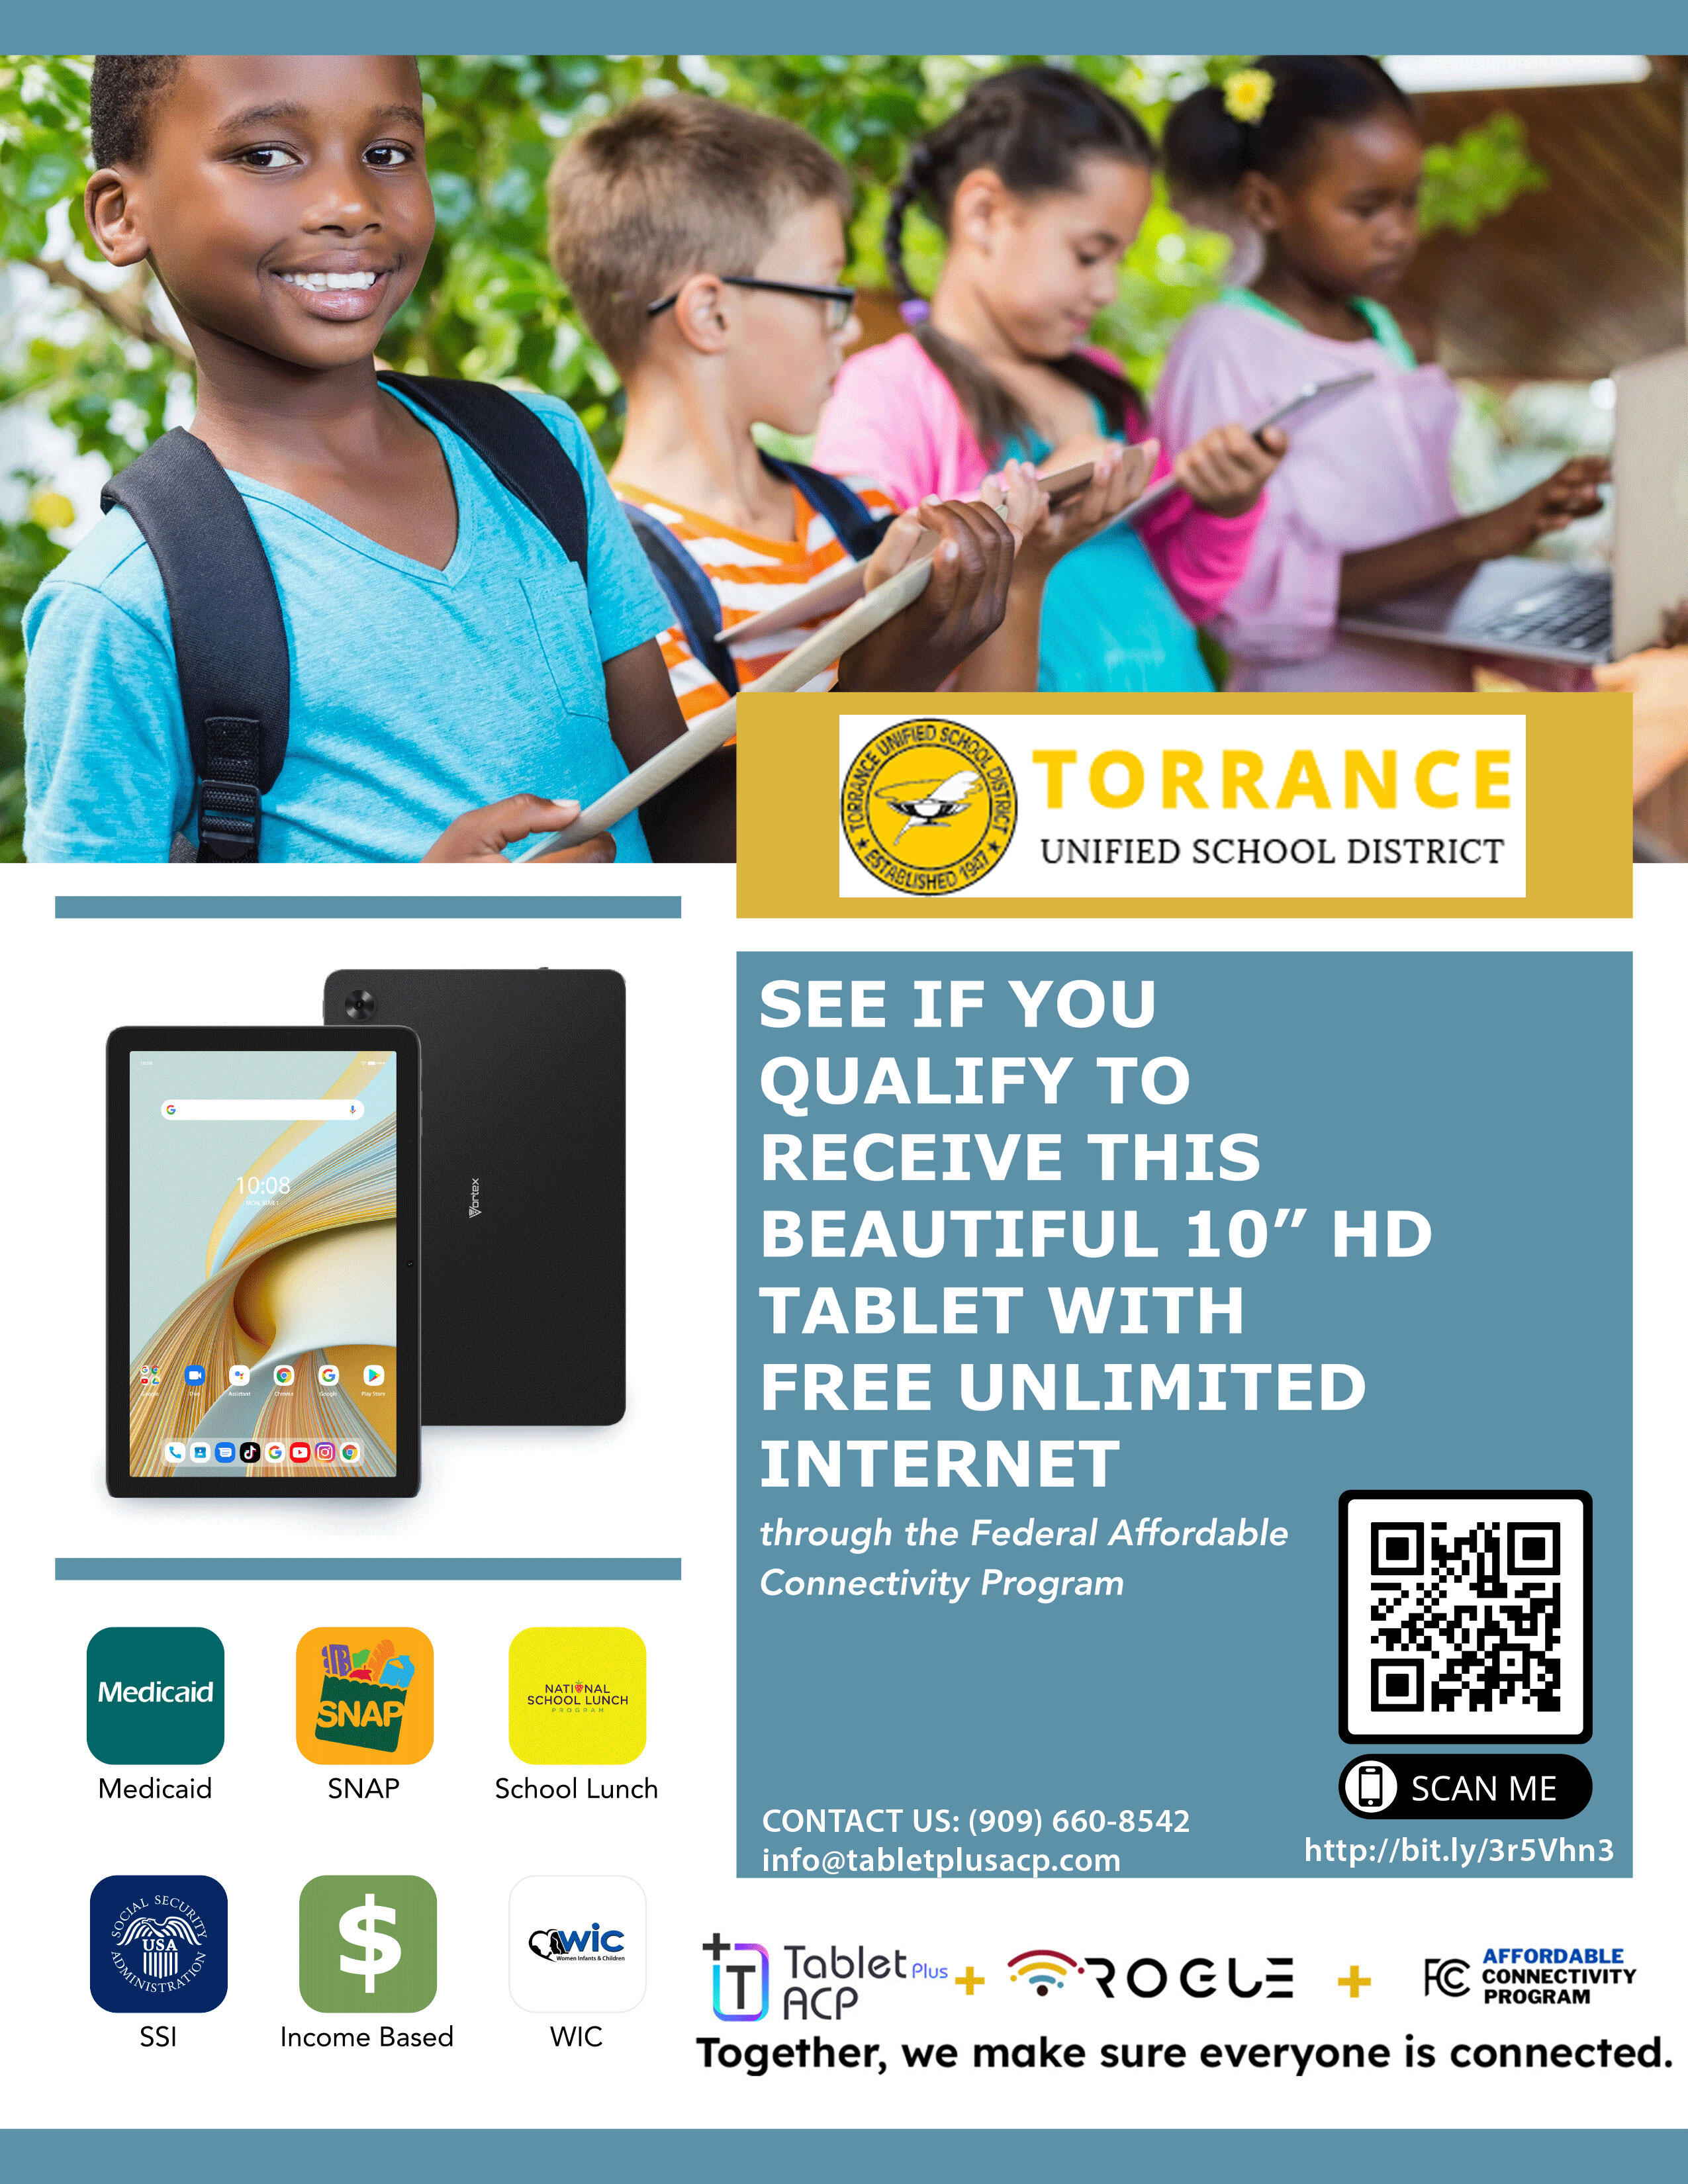 Register to get a Free Tablet